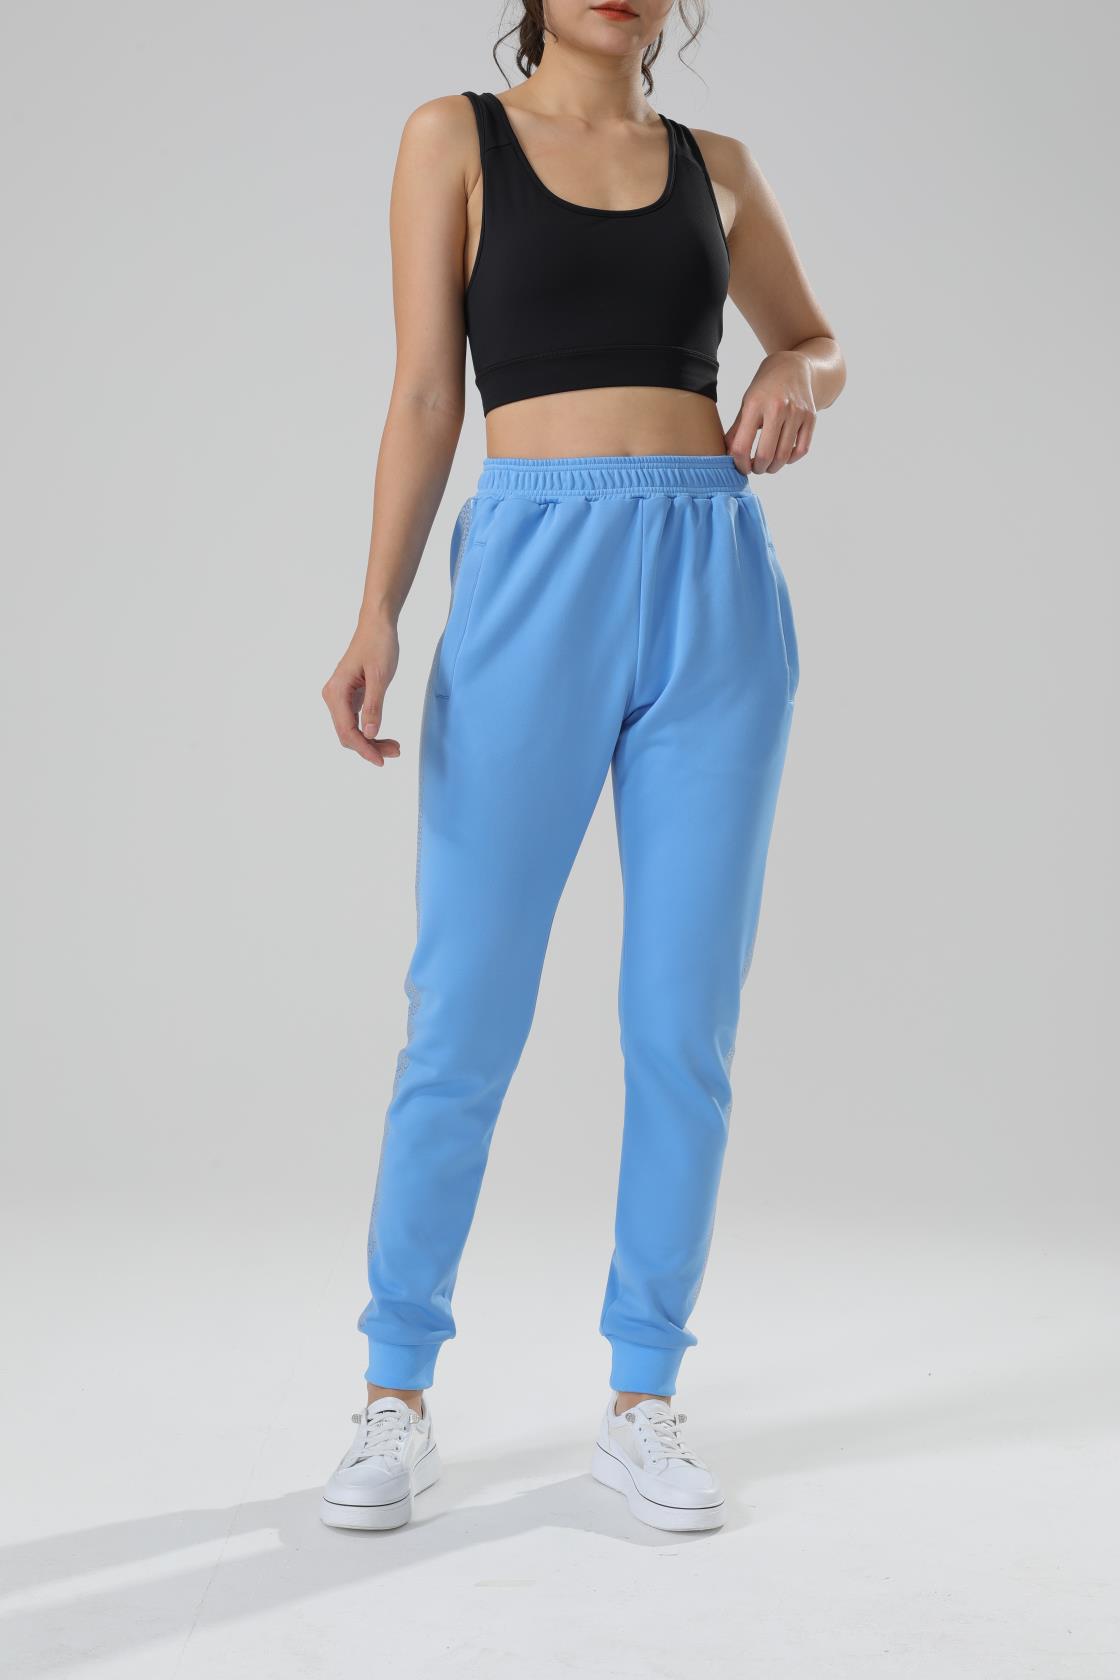 Buy Regular Fit Cotton Teal Blue Track pants for Women online in India -  Cupidclothings – Cupid Clothings